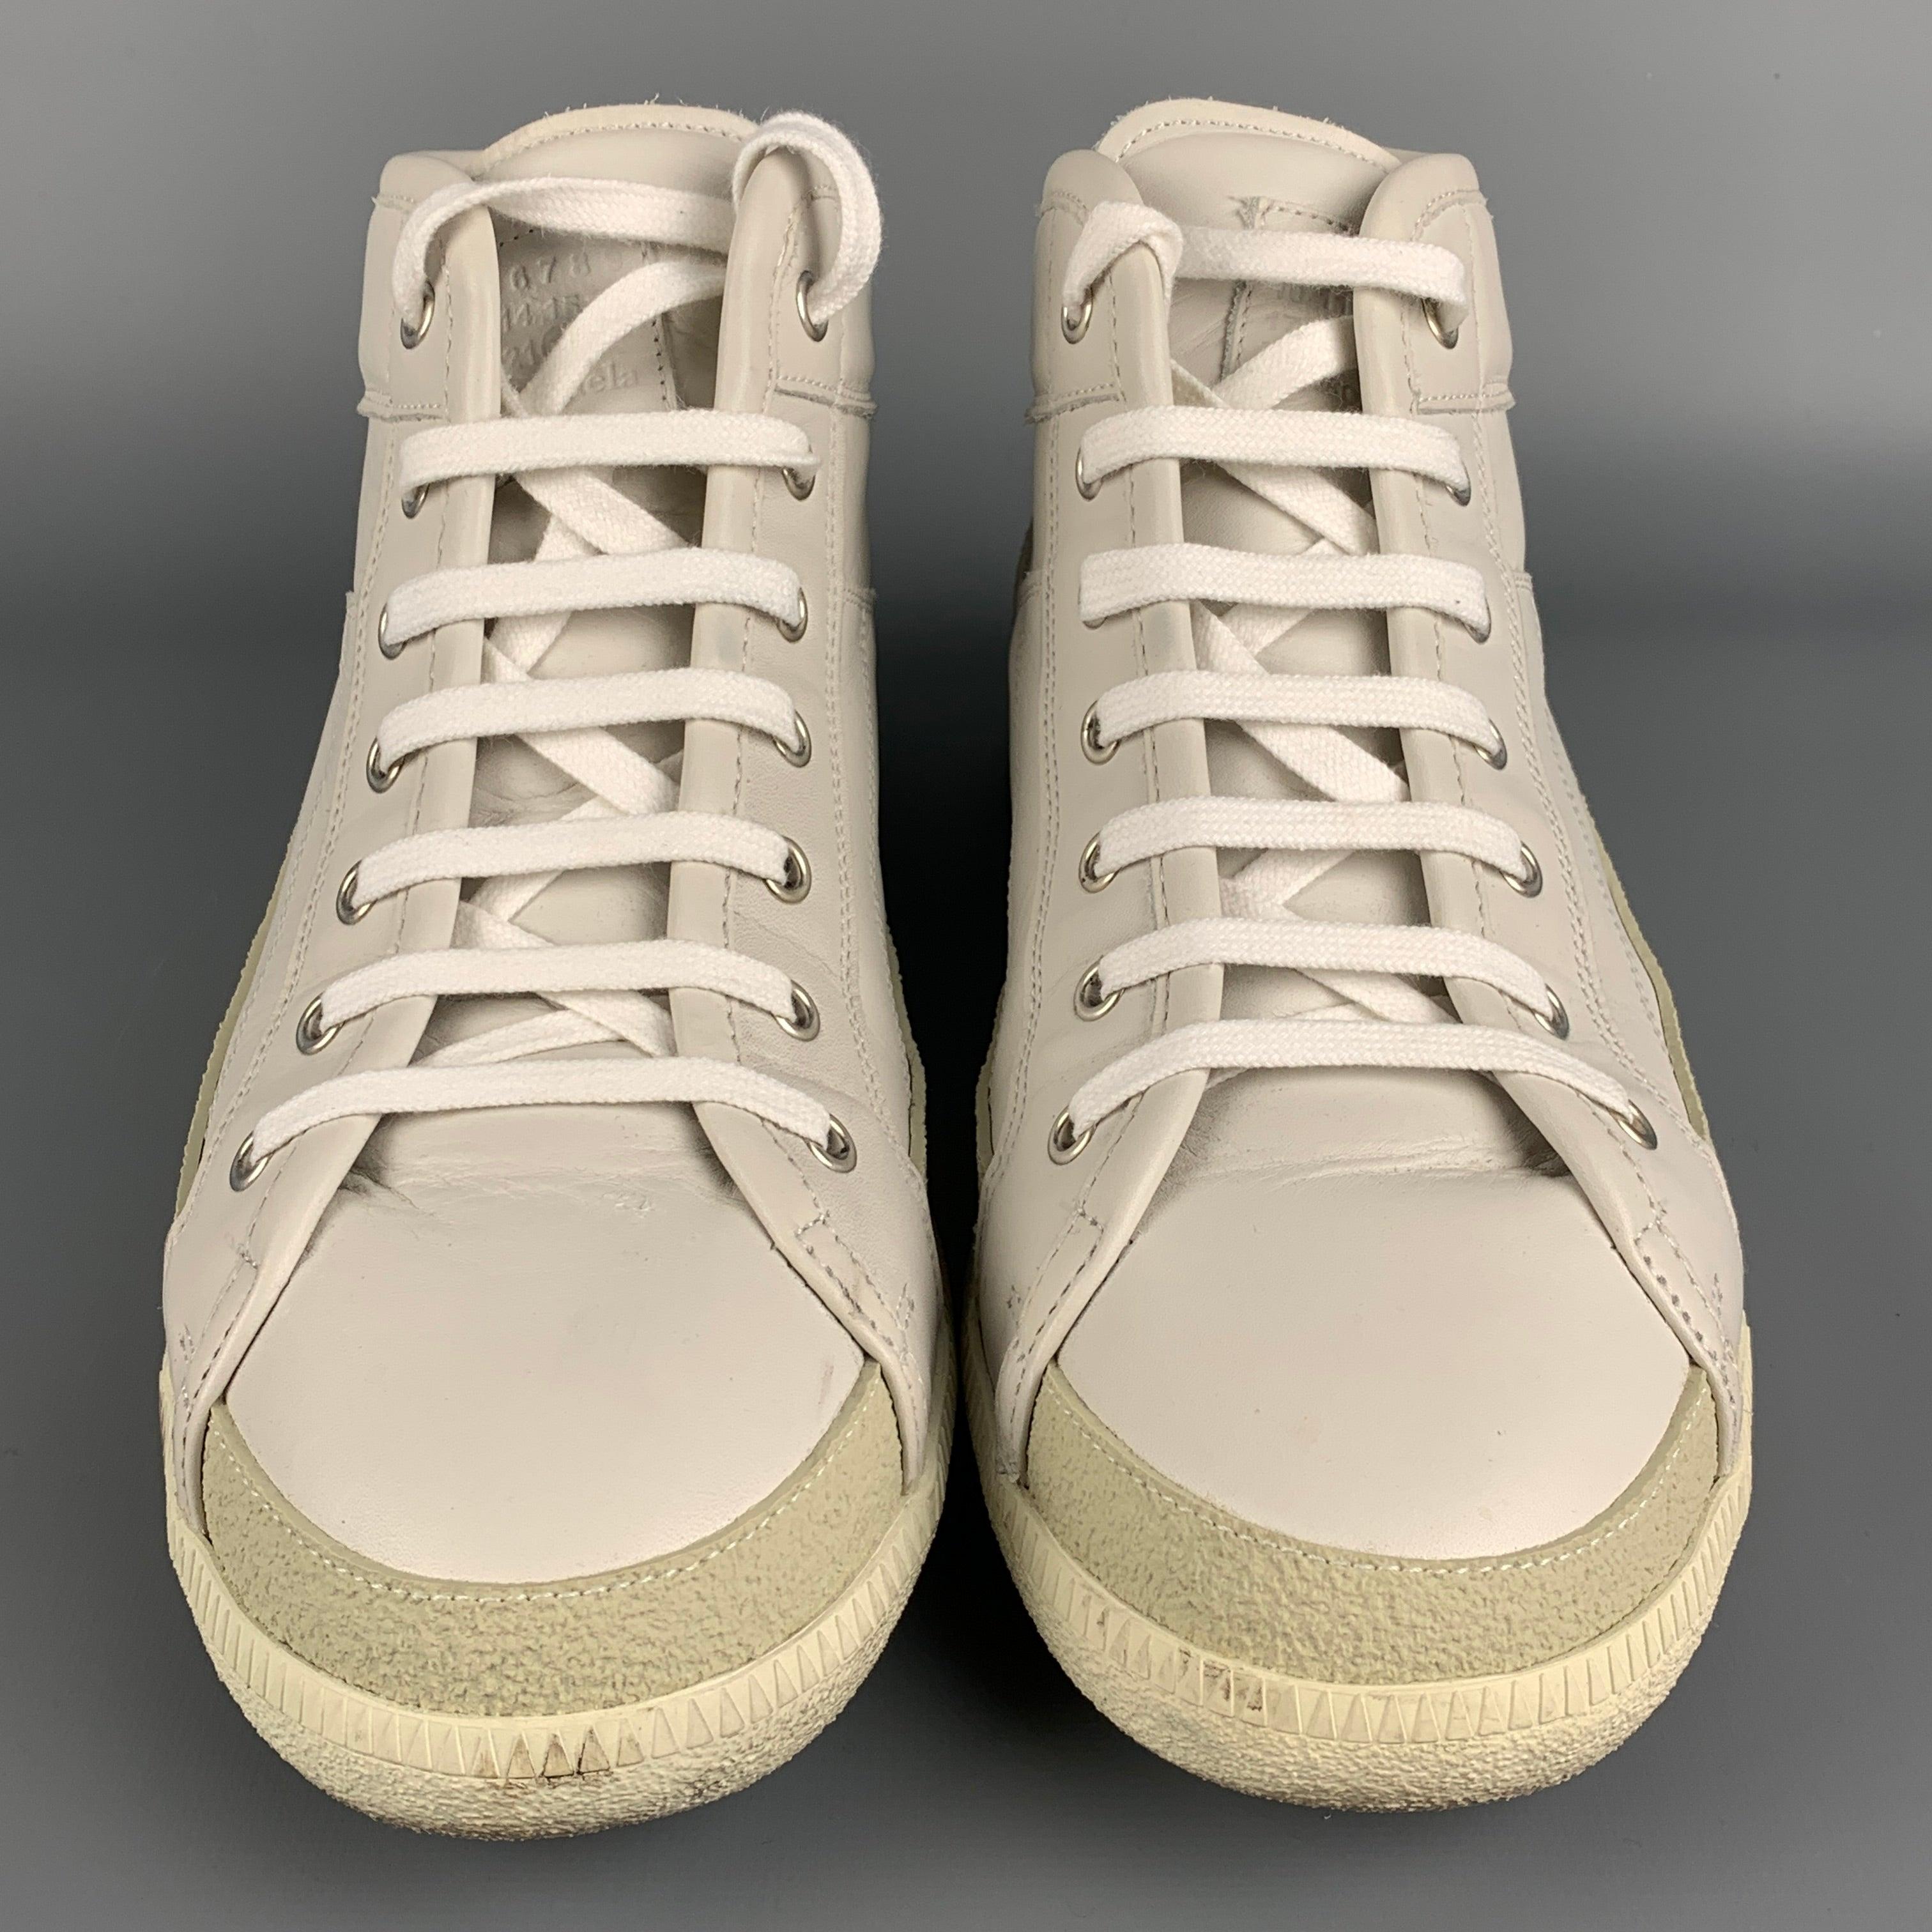 Men's MAISON MARGIELA Size 9 White Leather High Top Sneakers